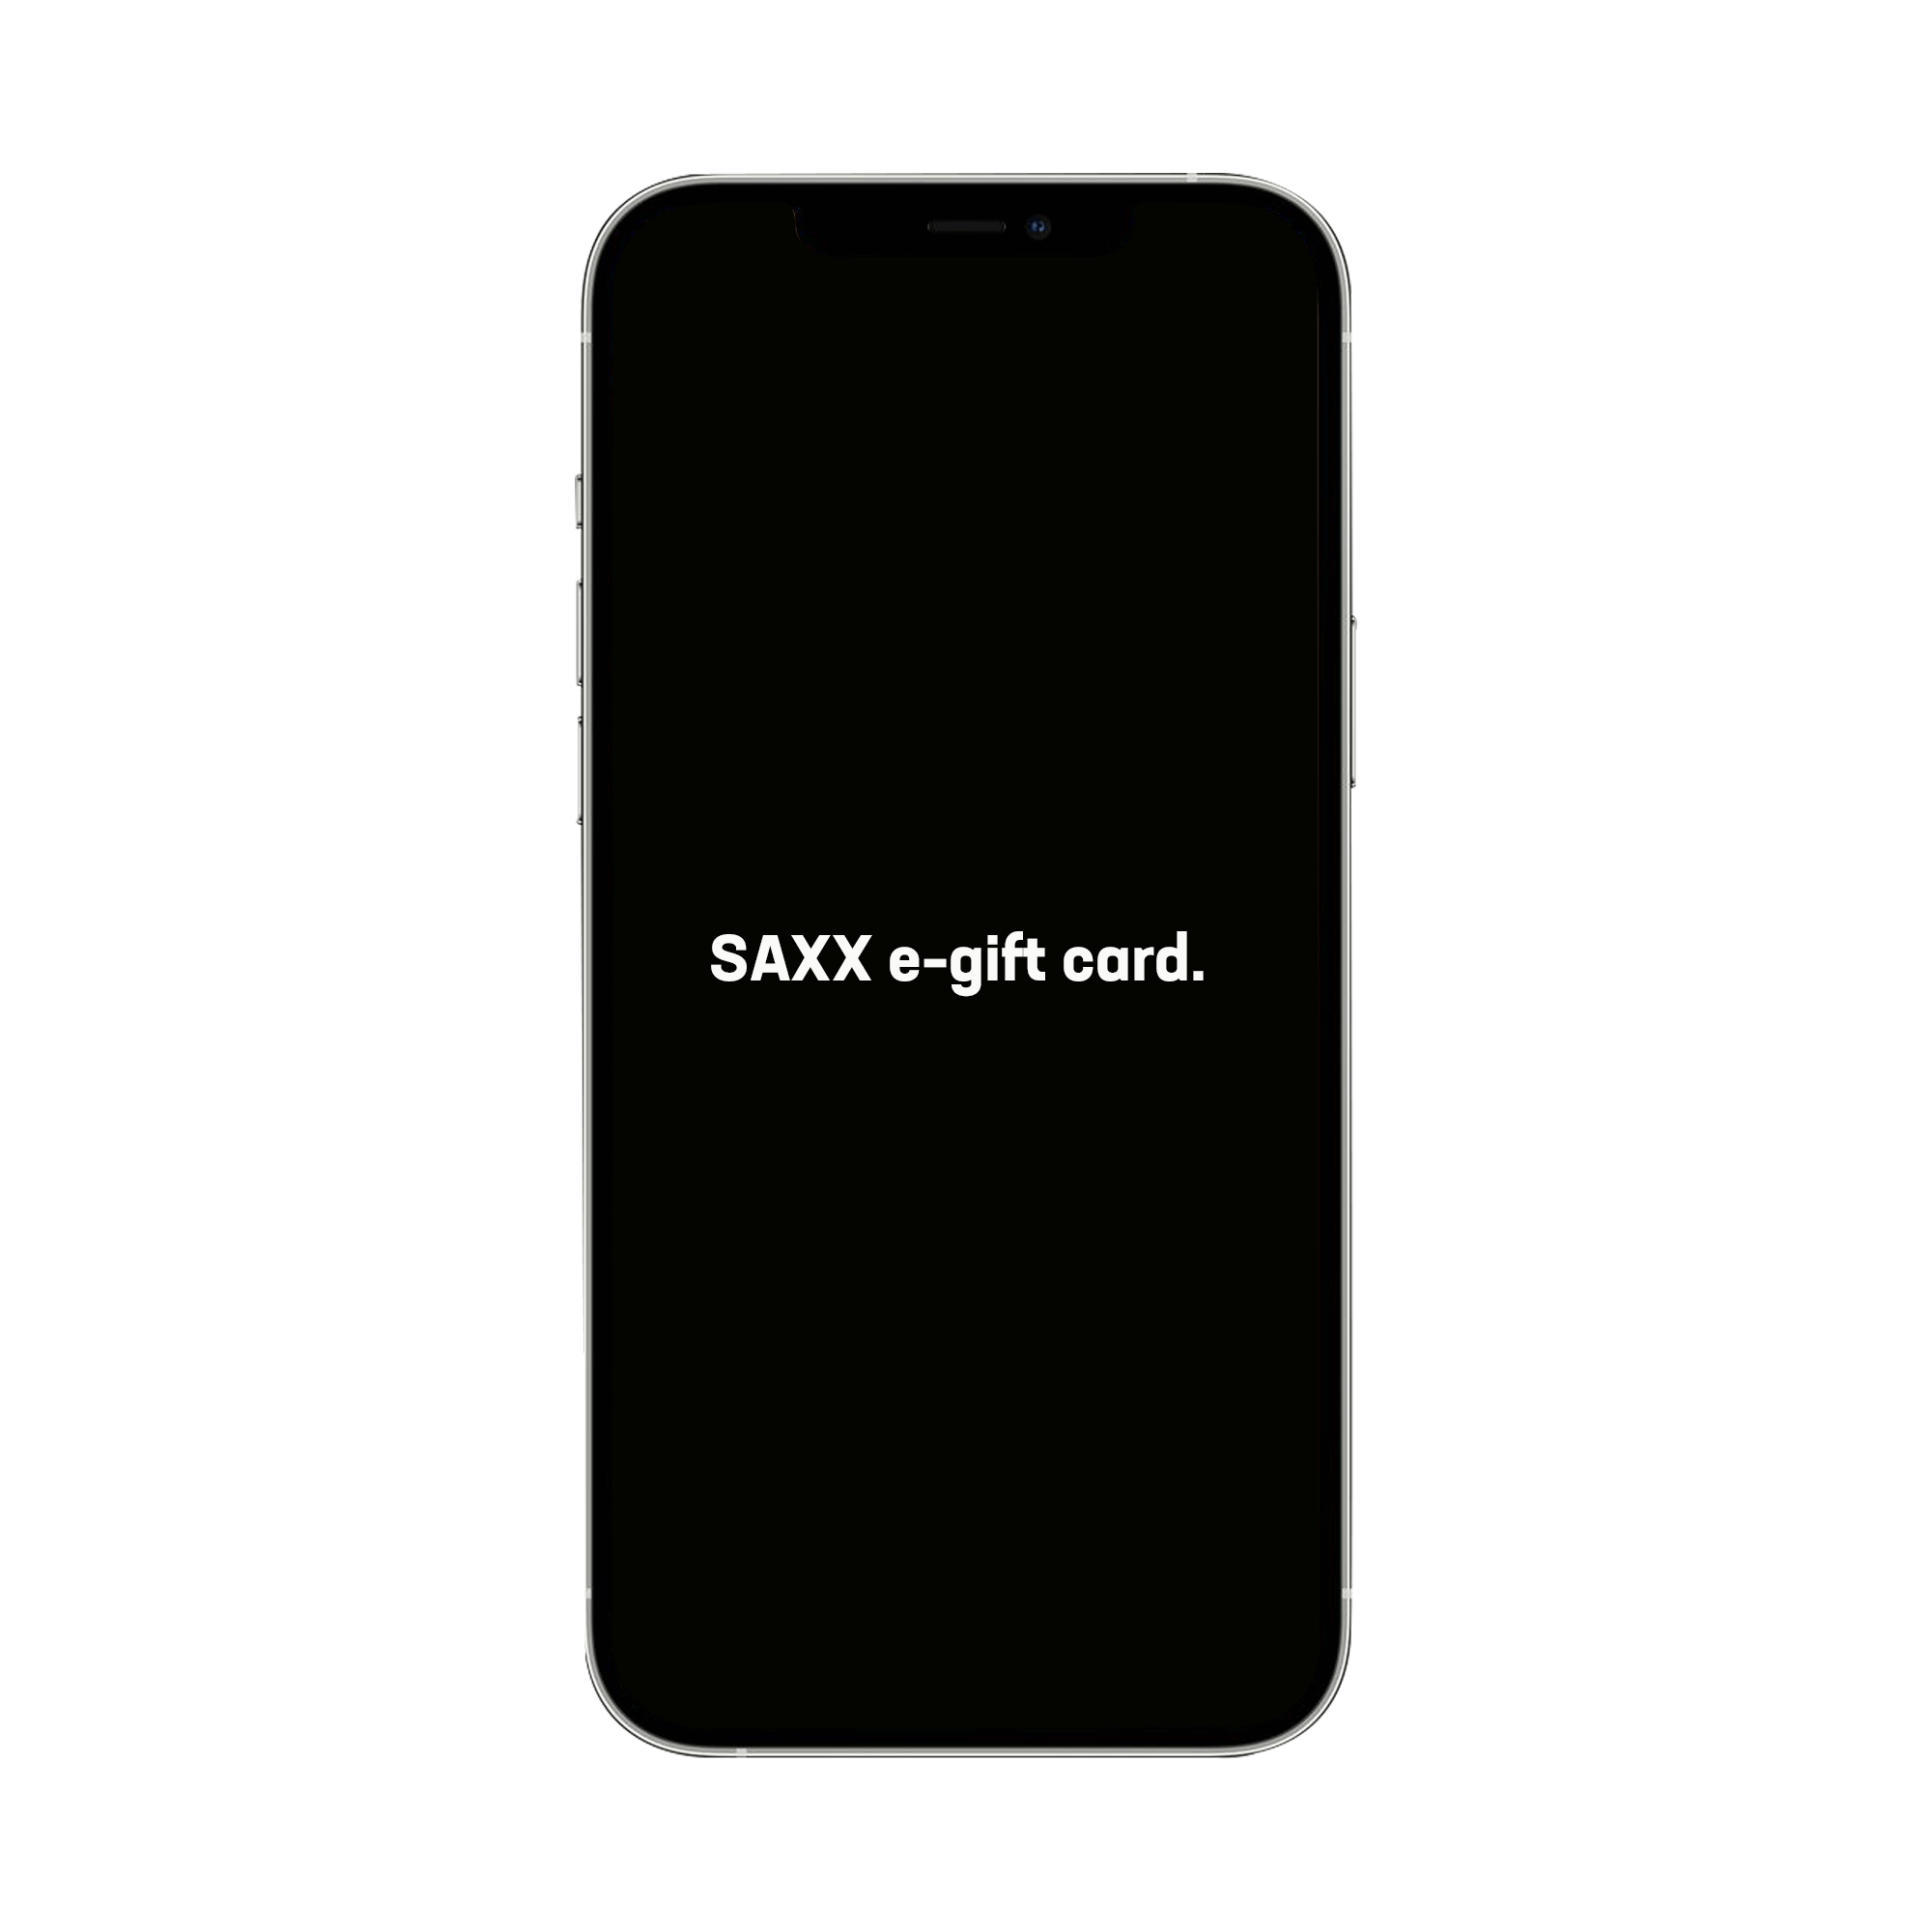 Cellphone display of SAXX electronic gift card